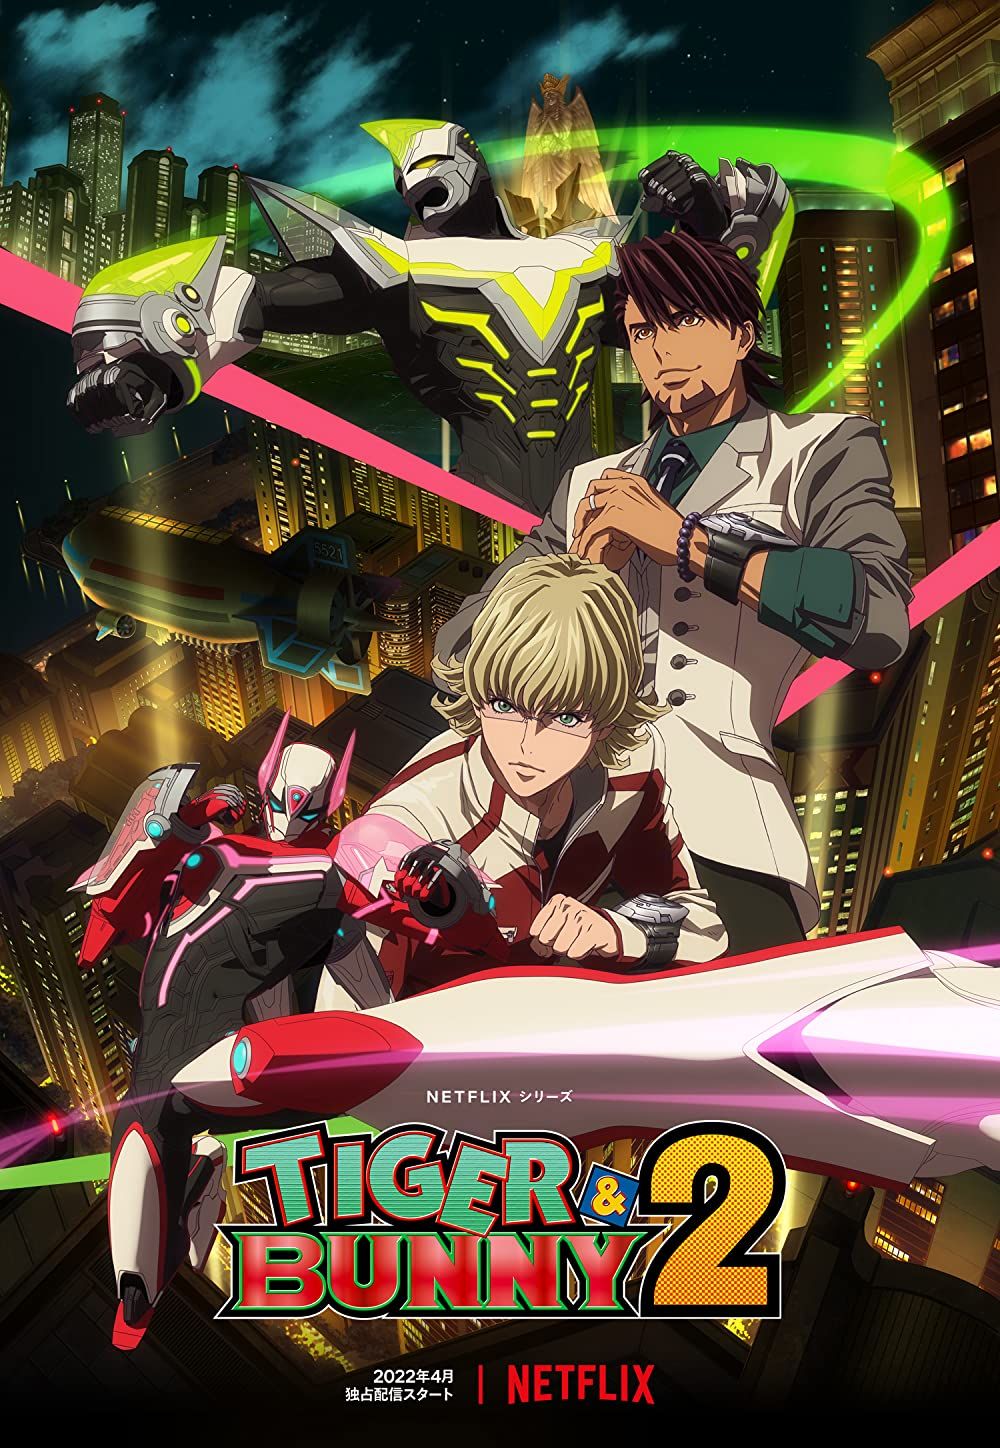 The cast of Tiger and Bunny posing in front of their suits on Tiger & Bunny Season 2 cover art.